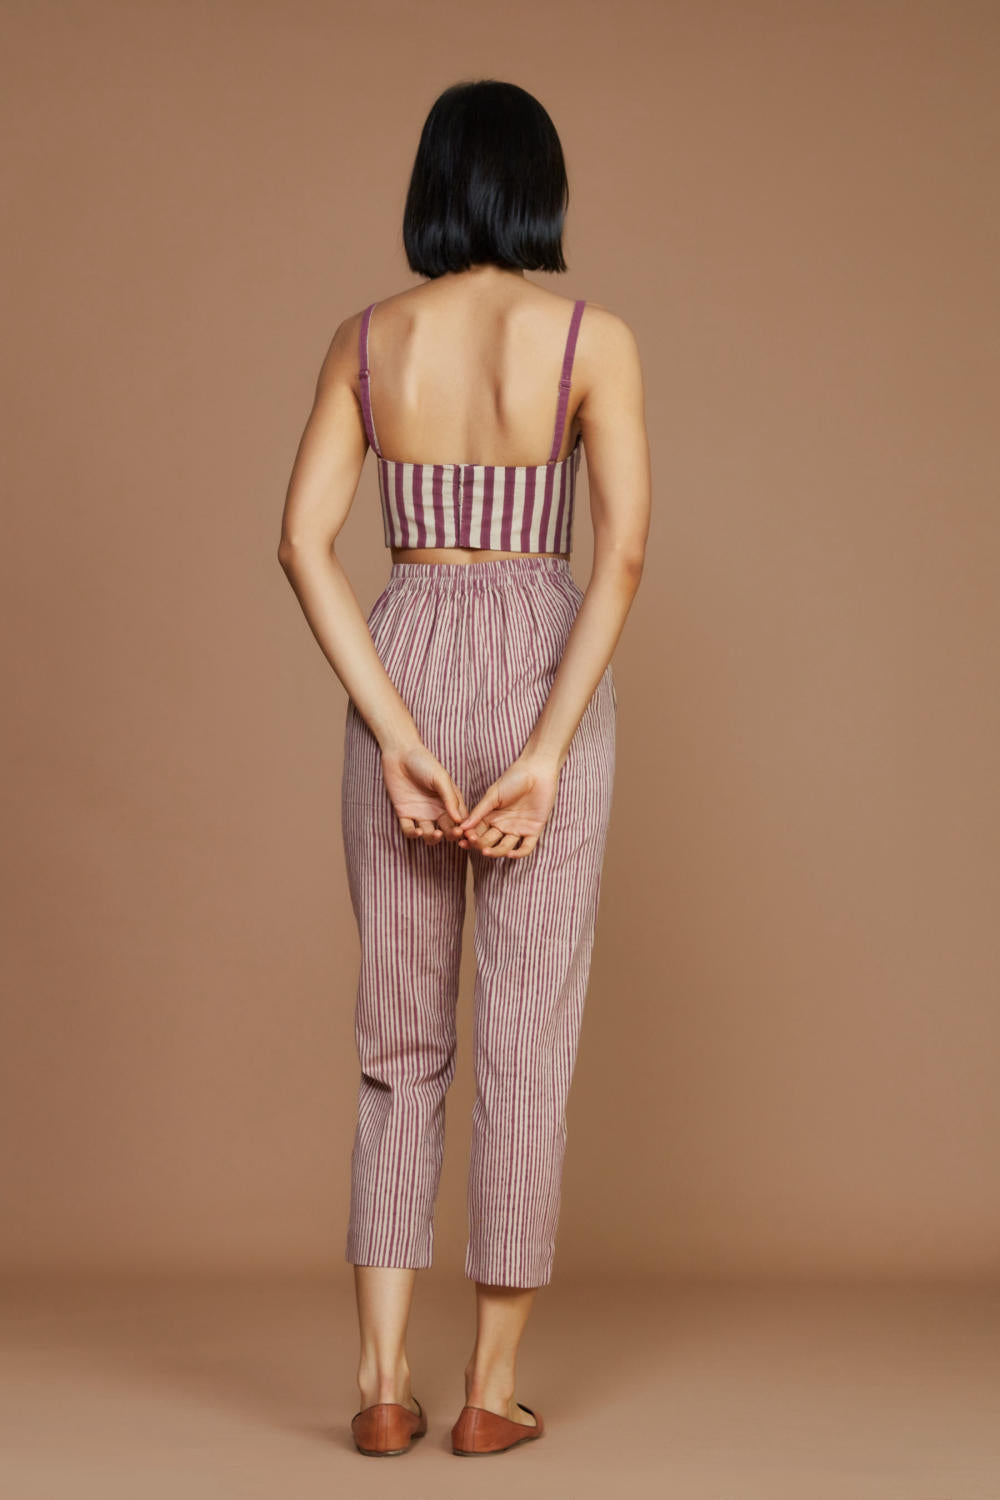 Ivory with Mauve Striped Trench & Corset Co-Ord Set Fashion Mati